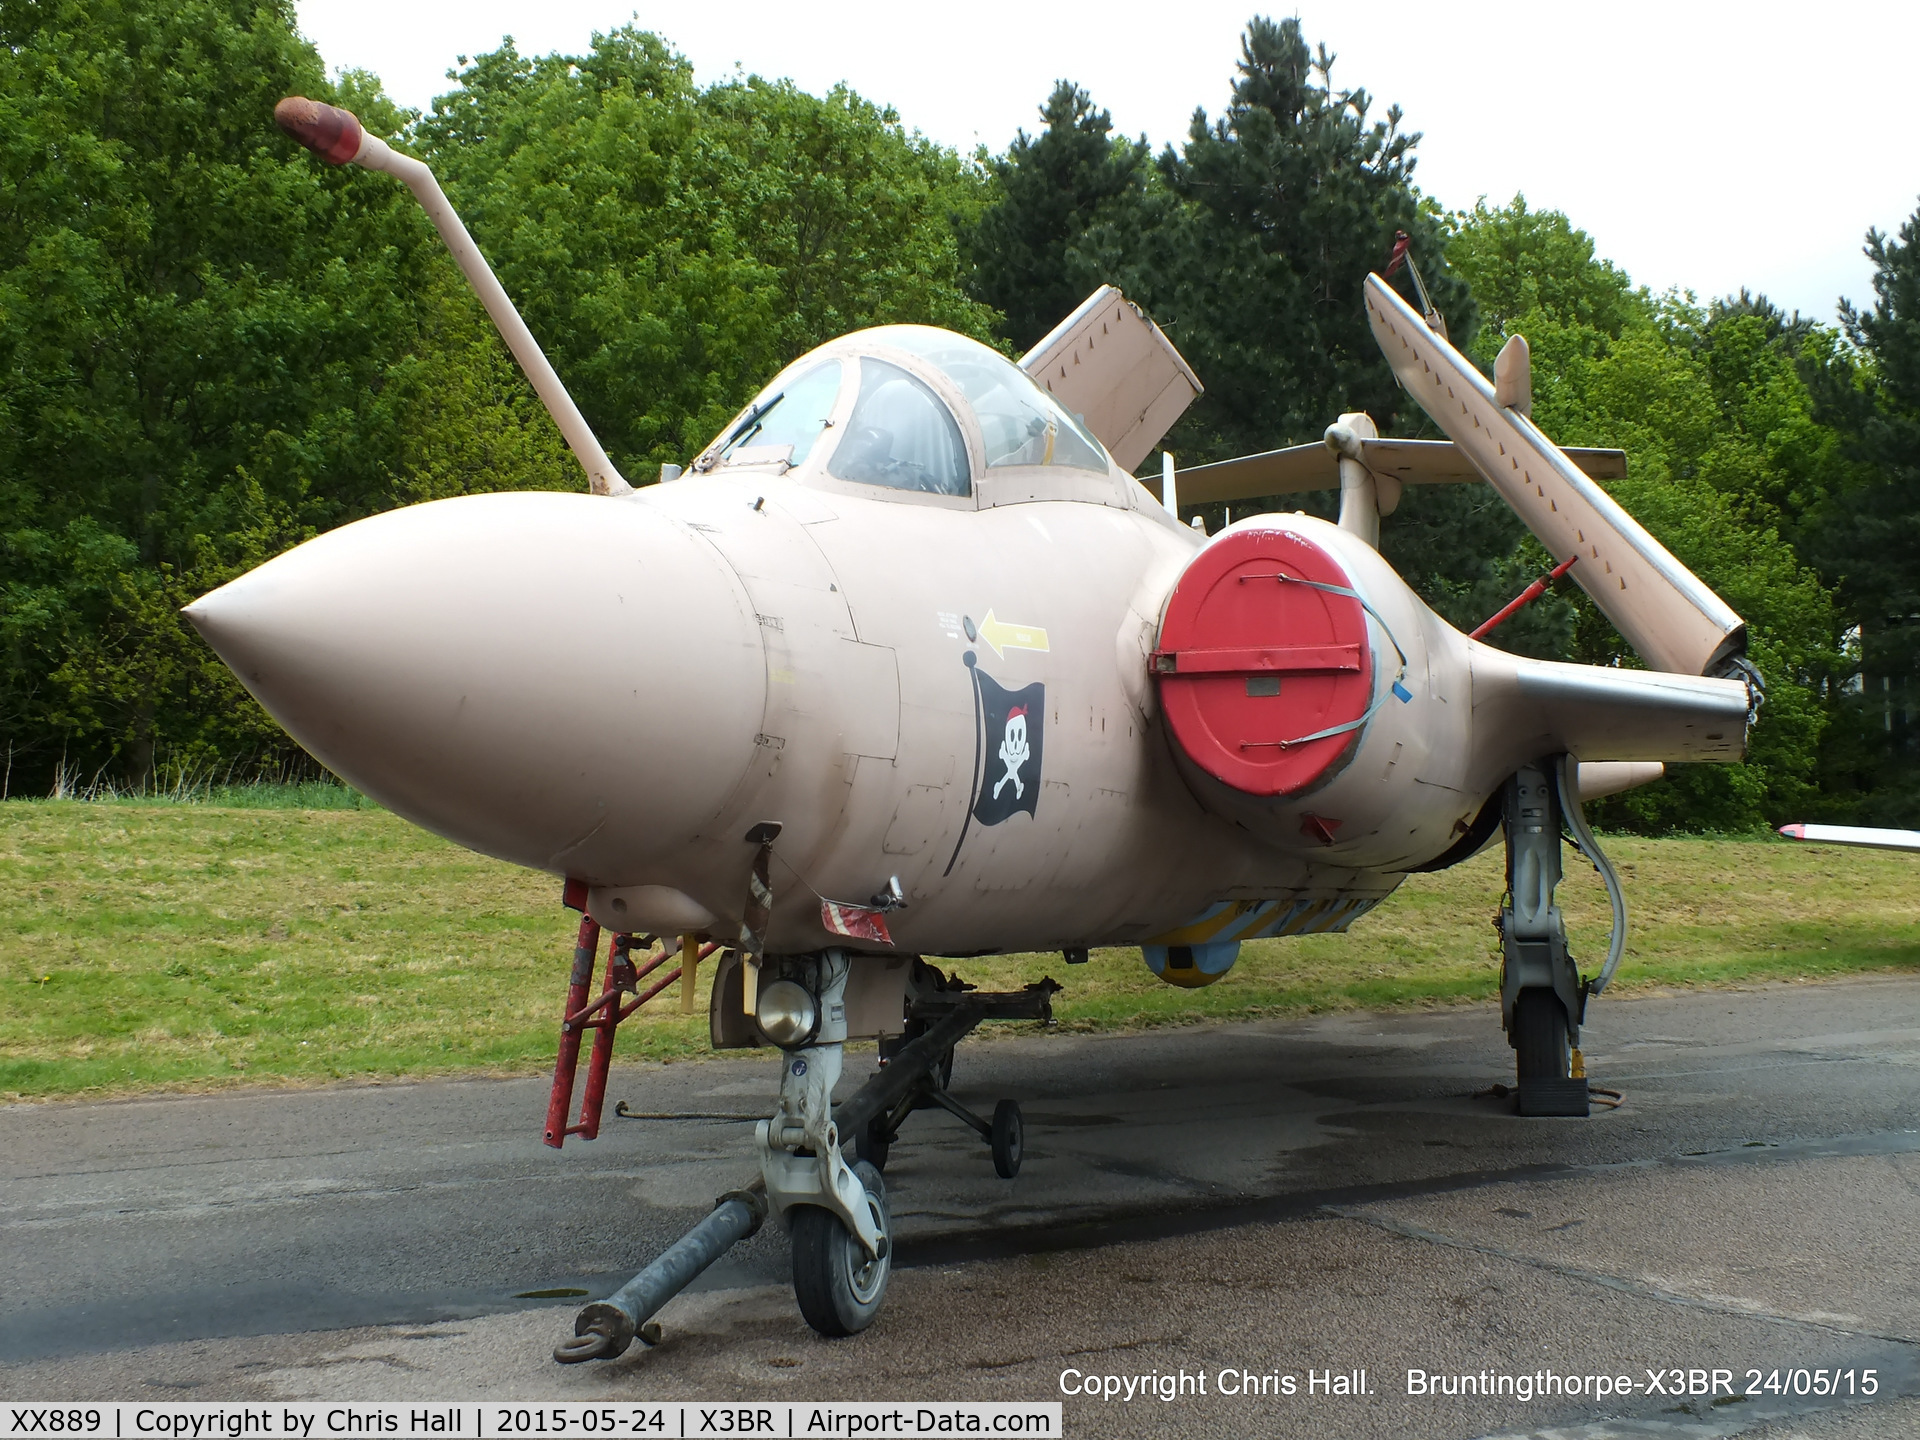 XX889, 1974 Hawker Siddeley Buccaneer S.2B C/N B3-05-73, at the Cold War Jets Open Day 2015